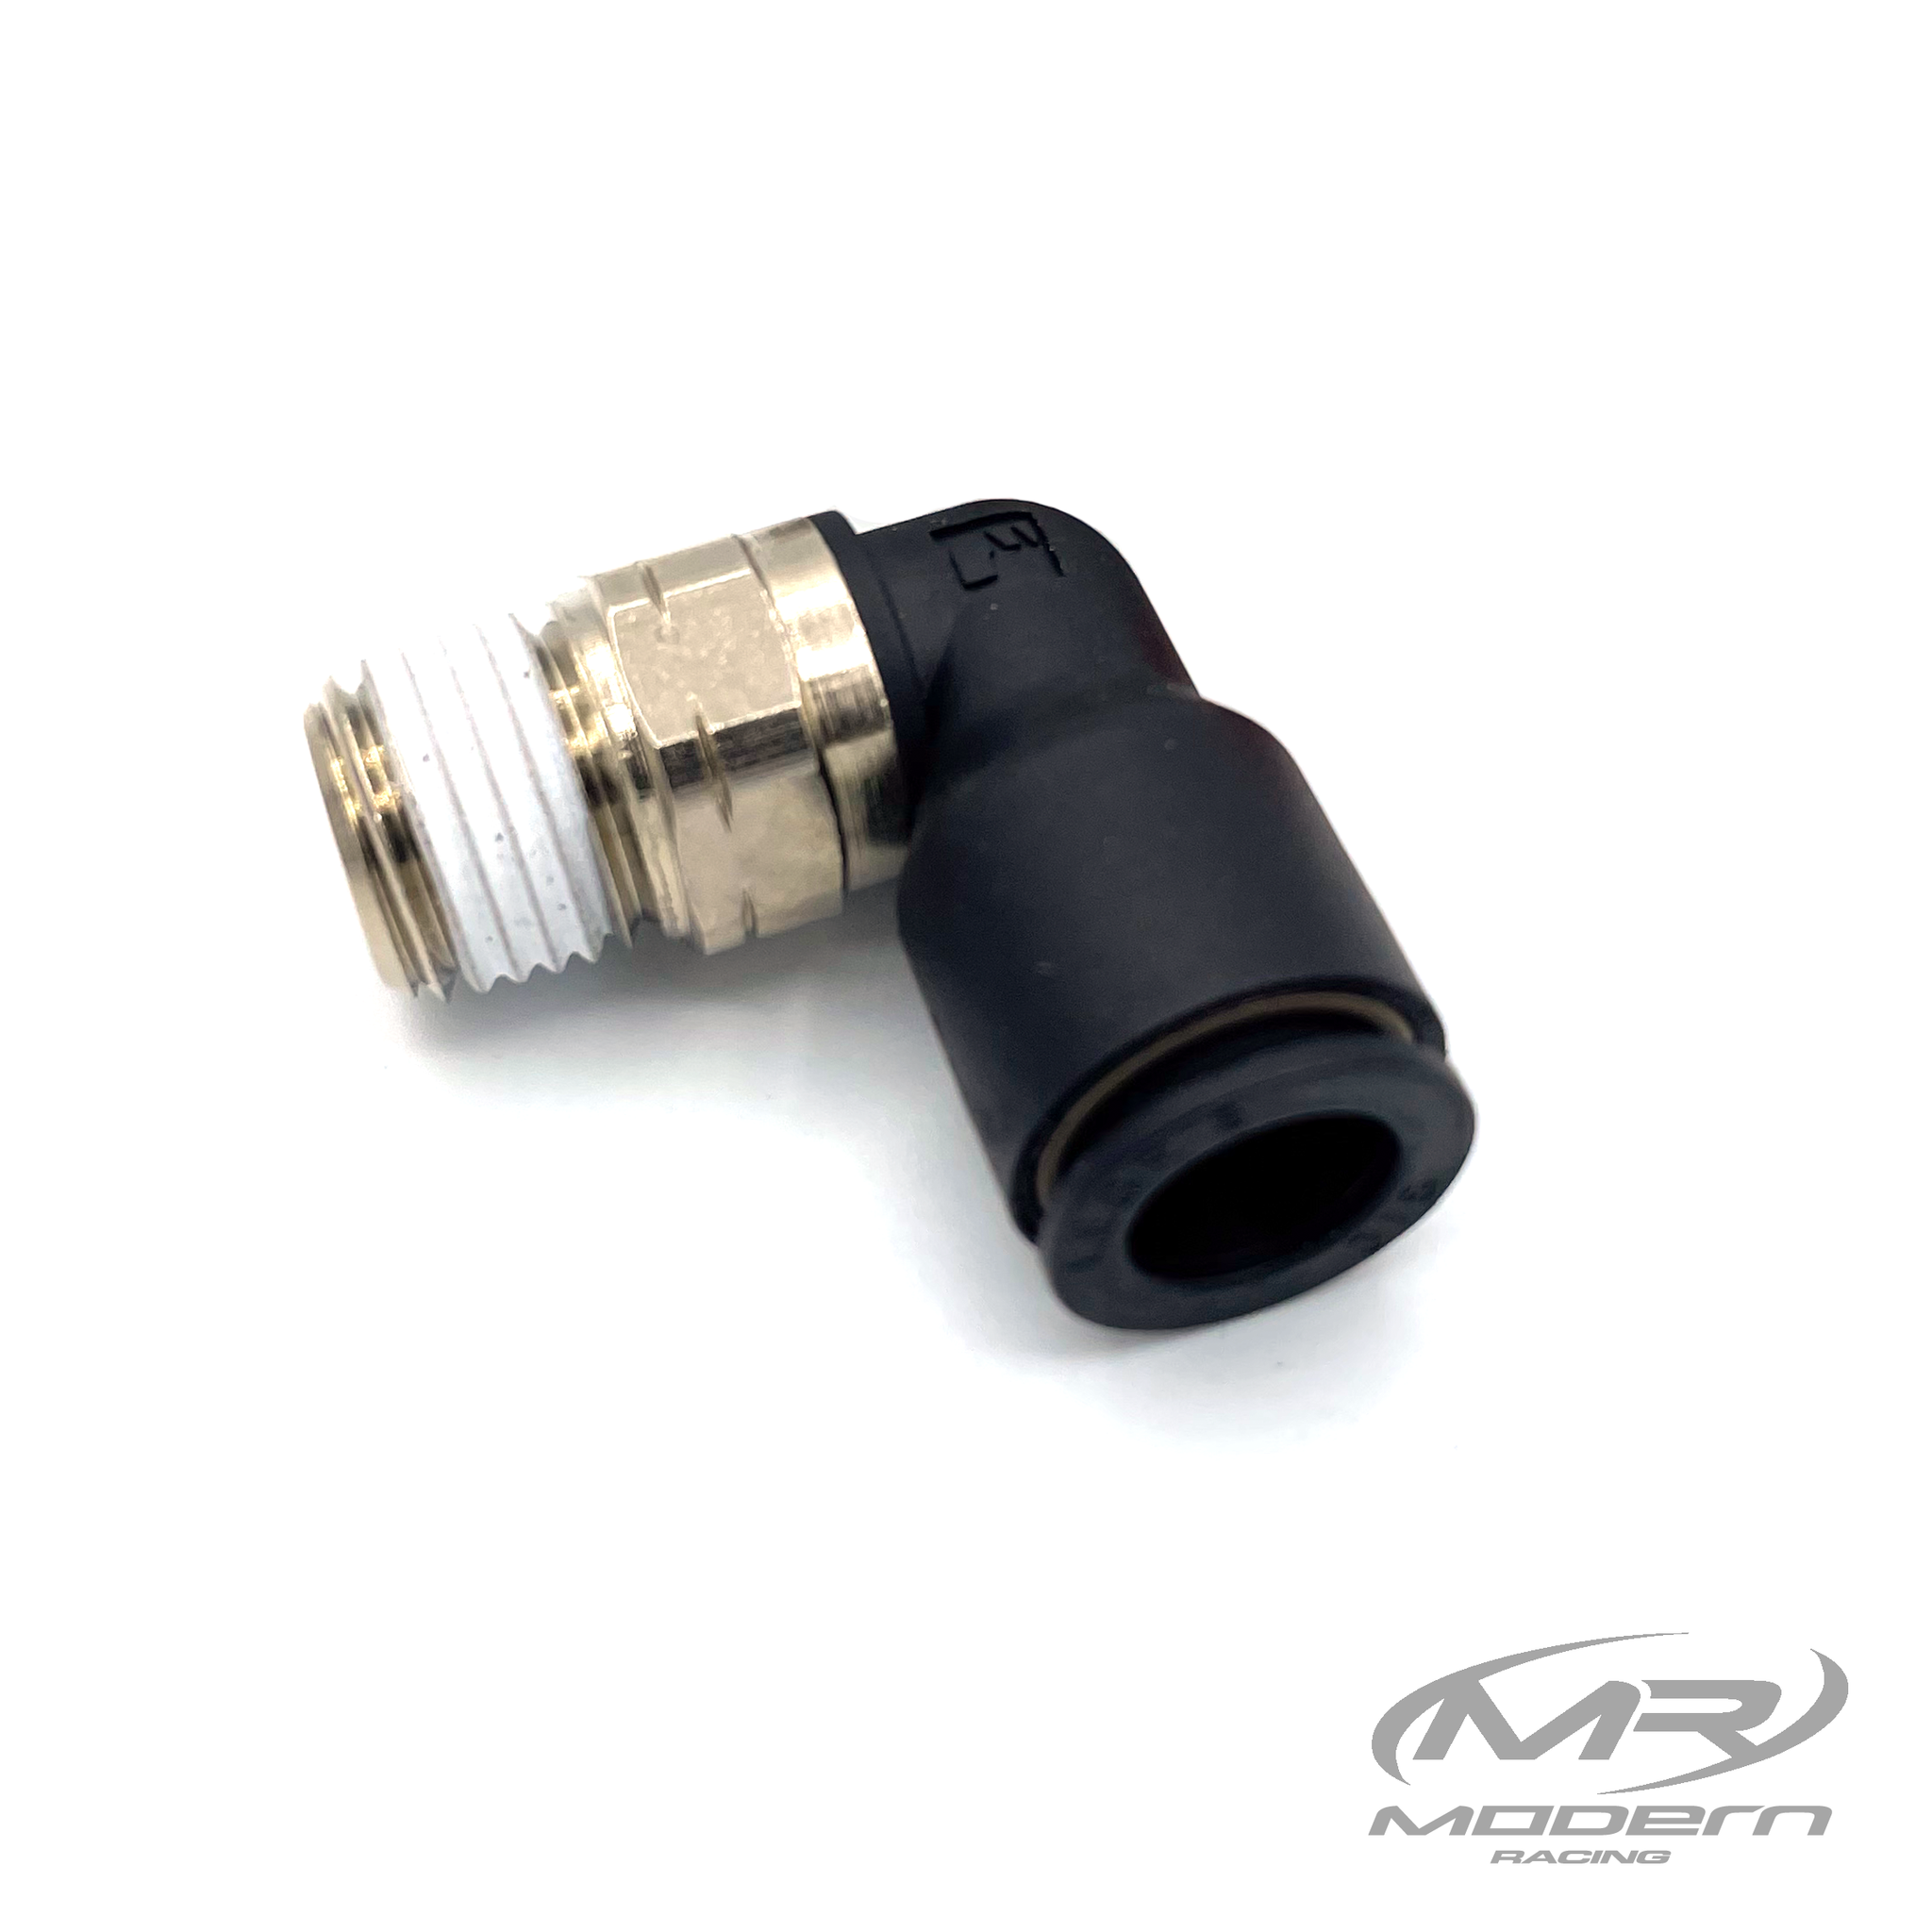 3/8" Push-Loc Female To 1/4" NPT Male 90* Air Fitting Brass/Plastic (Nickel Plated)